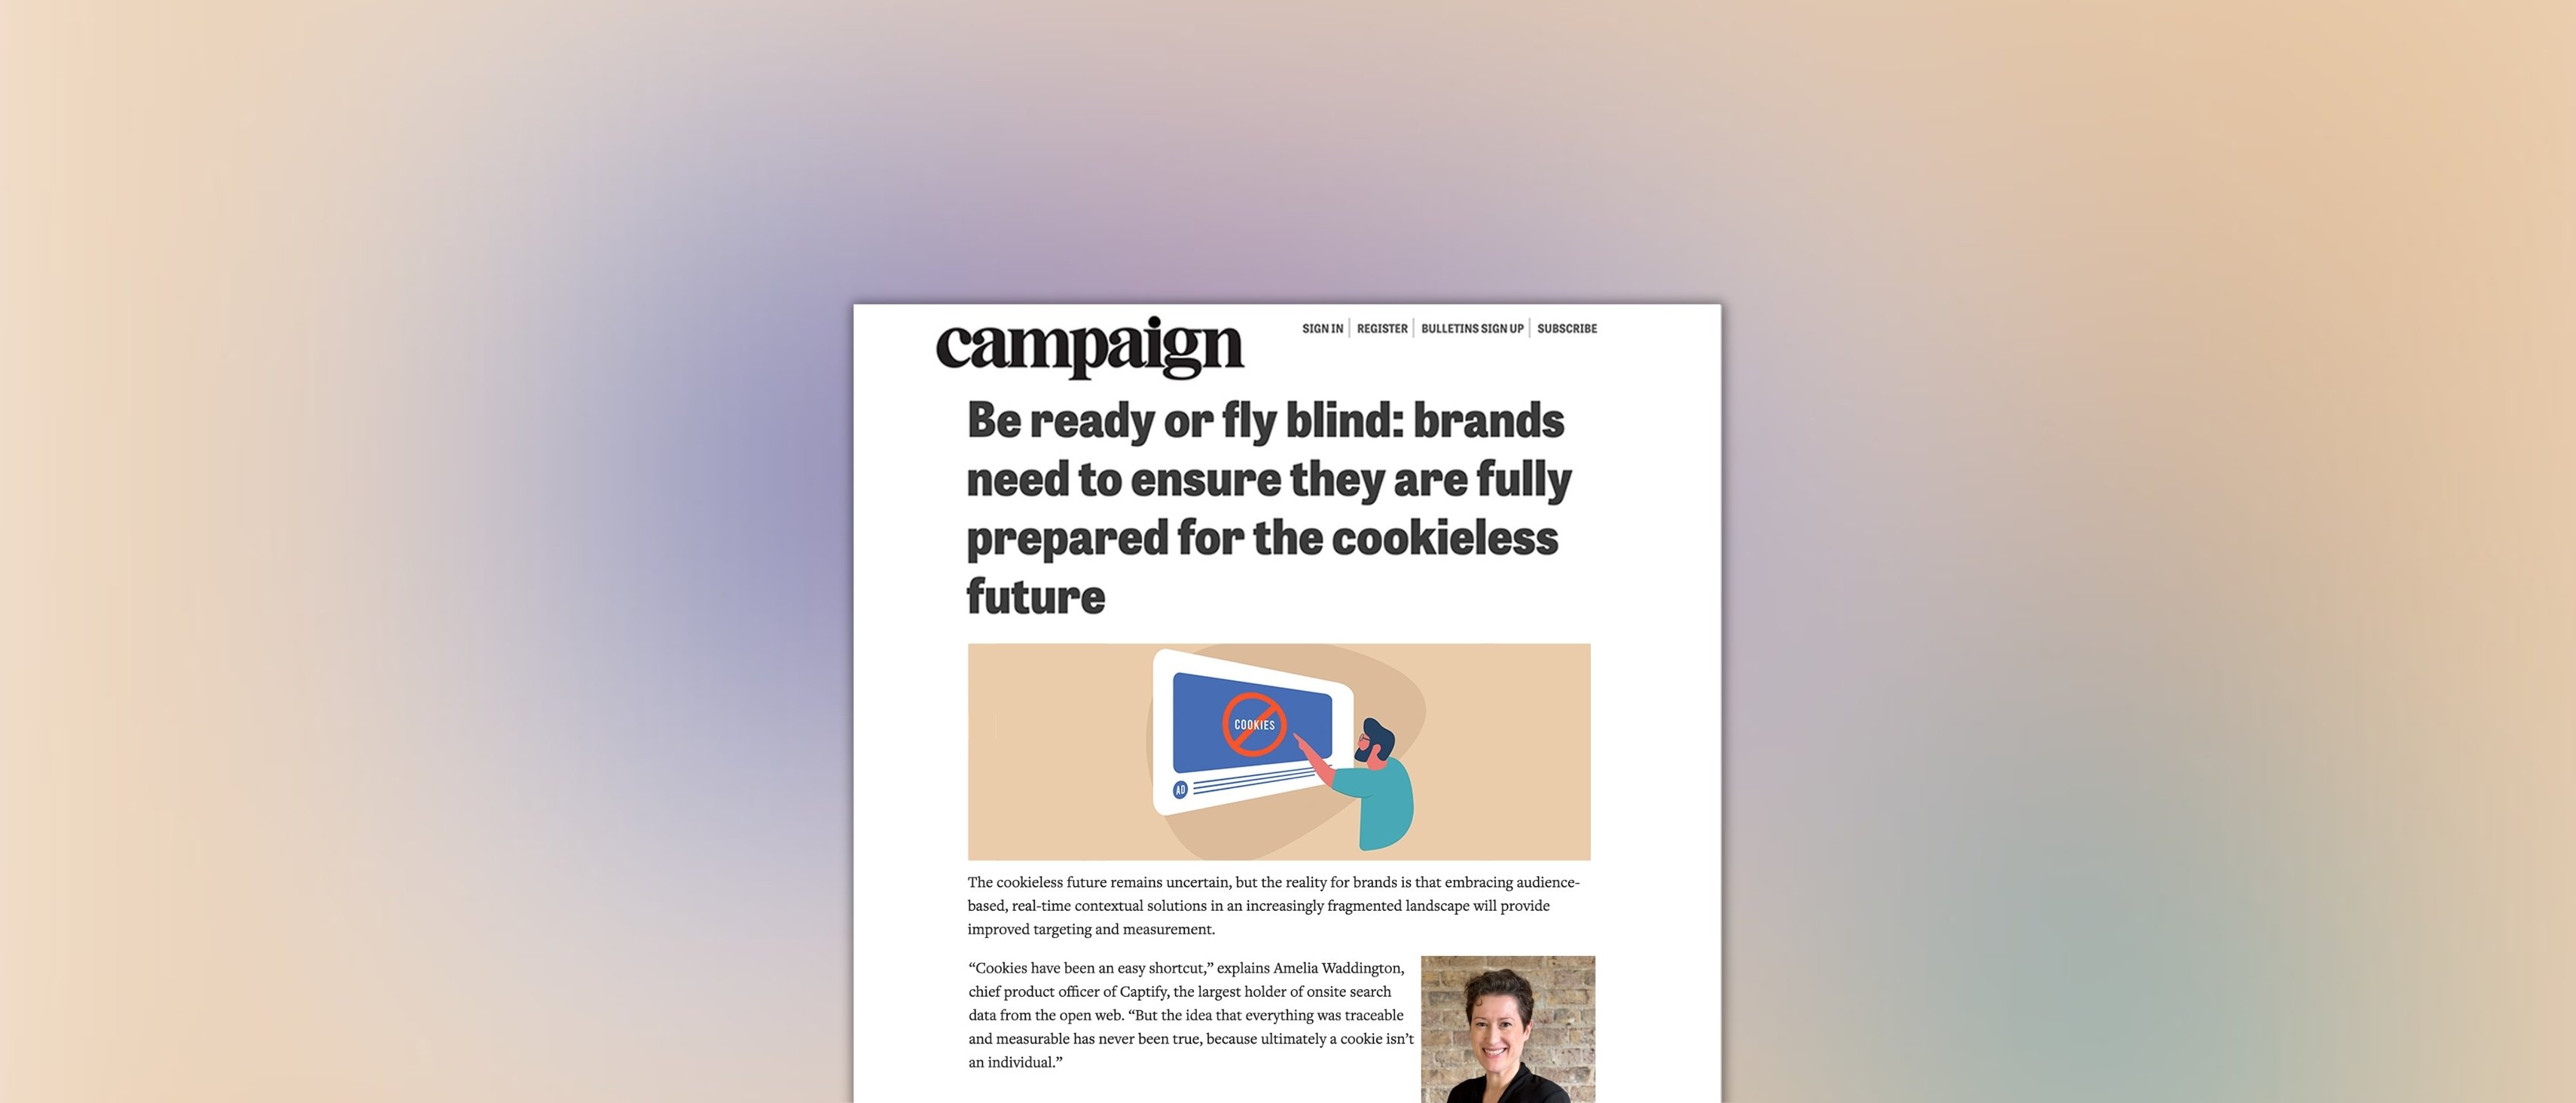 Campaign: Be Ready or Fly Blind—Brands Need to Ensure they are Fully Prepared for the Cookieless Future